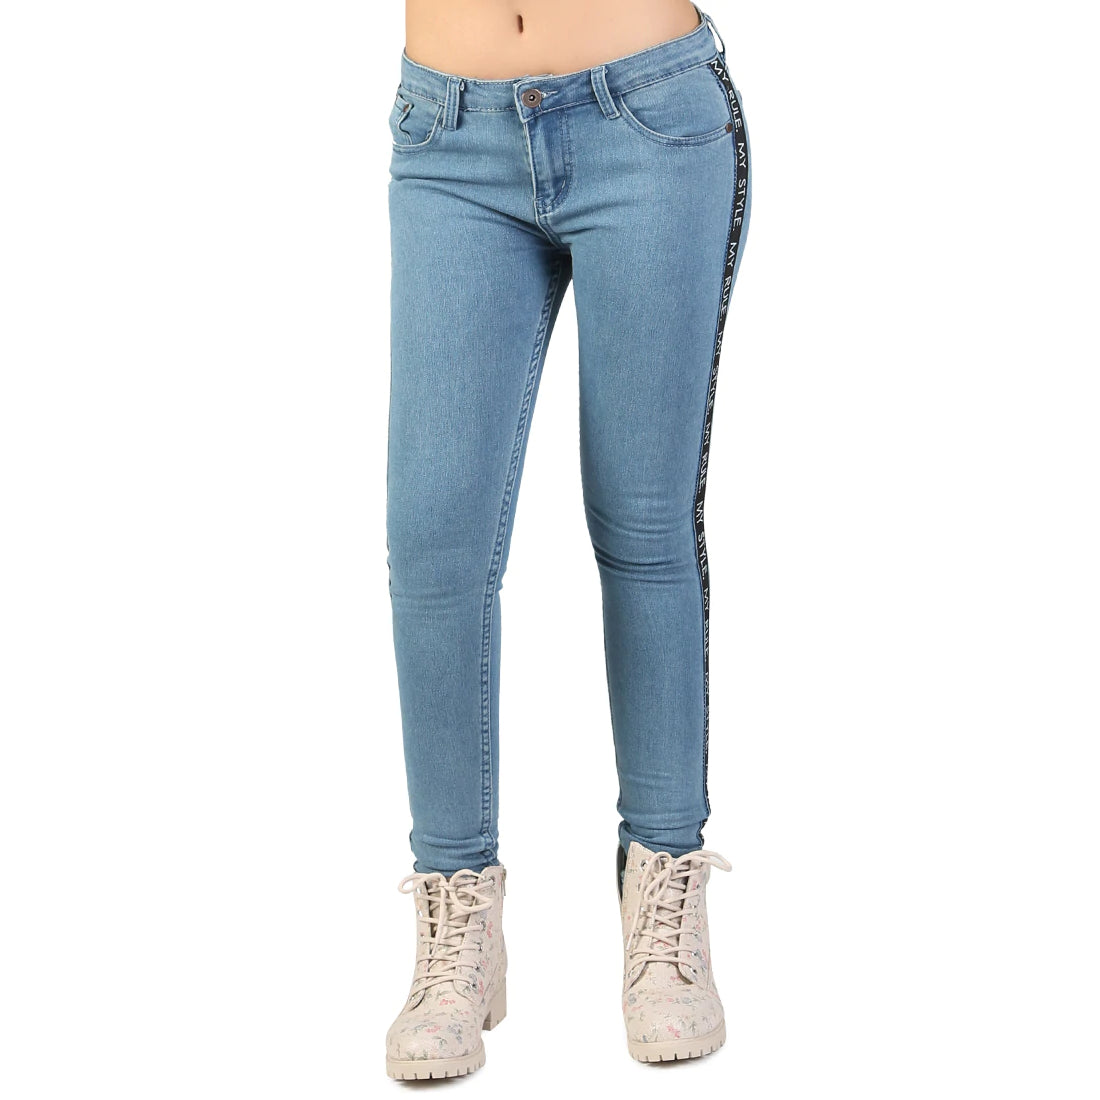 SKINNY SIDE TAPED JEANS